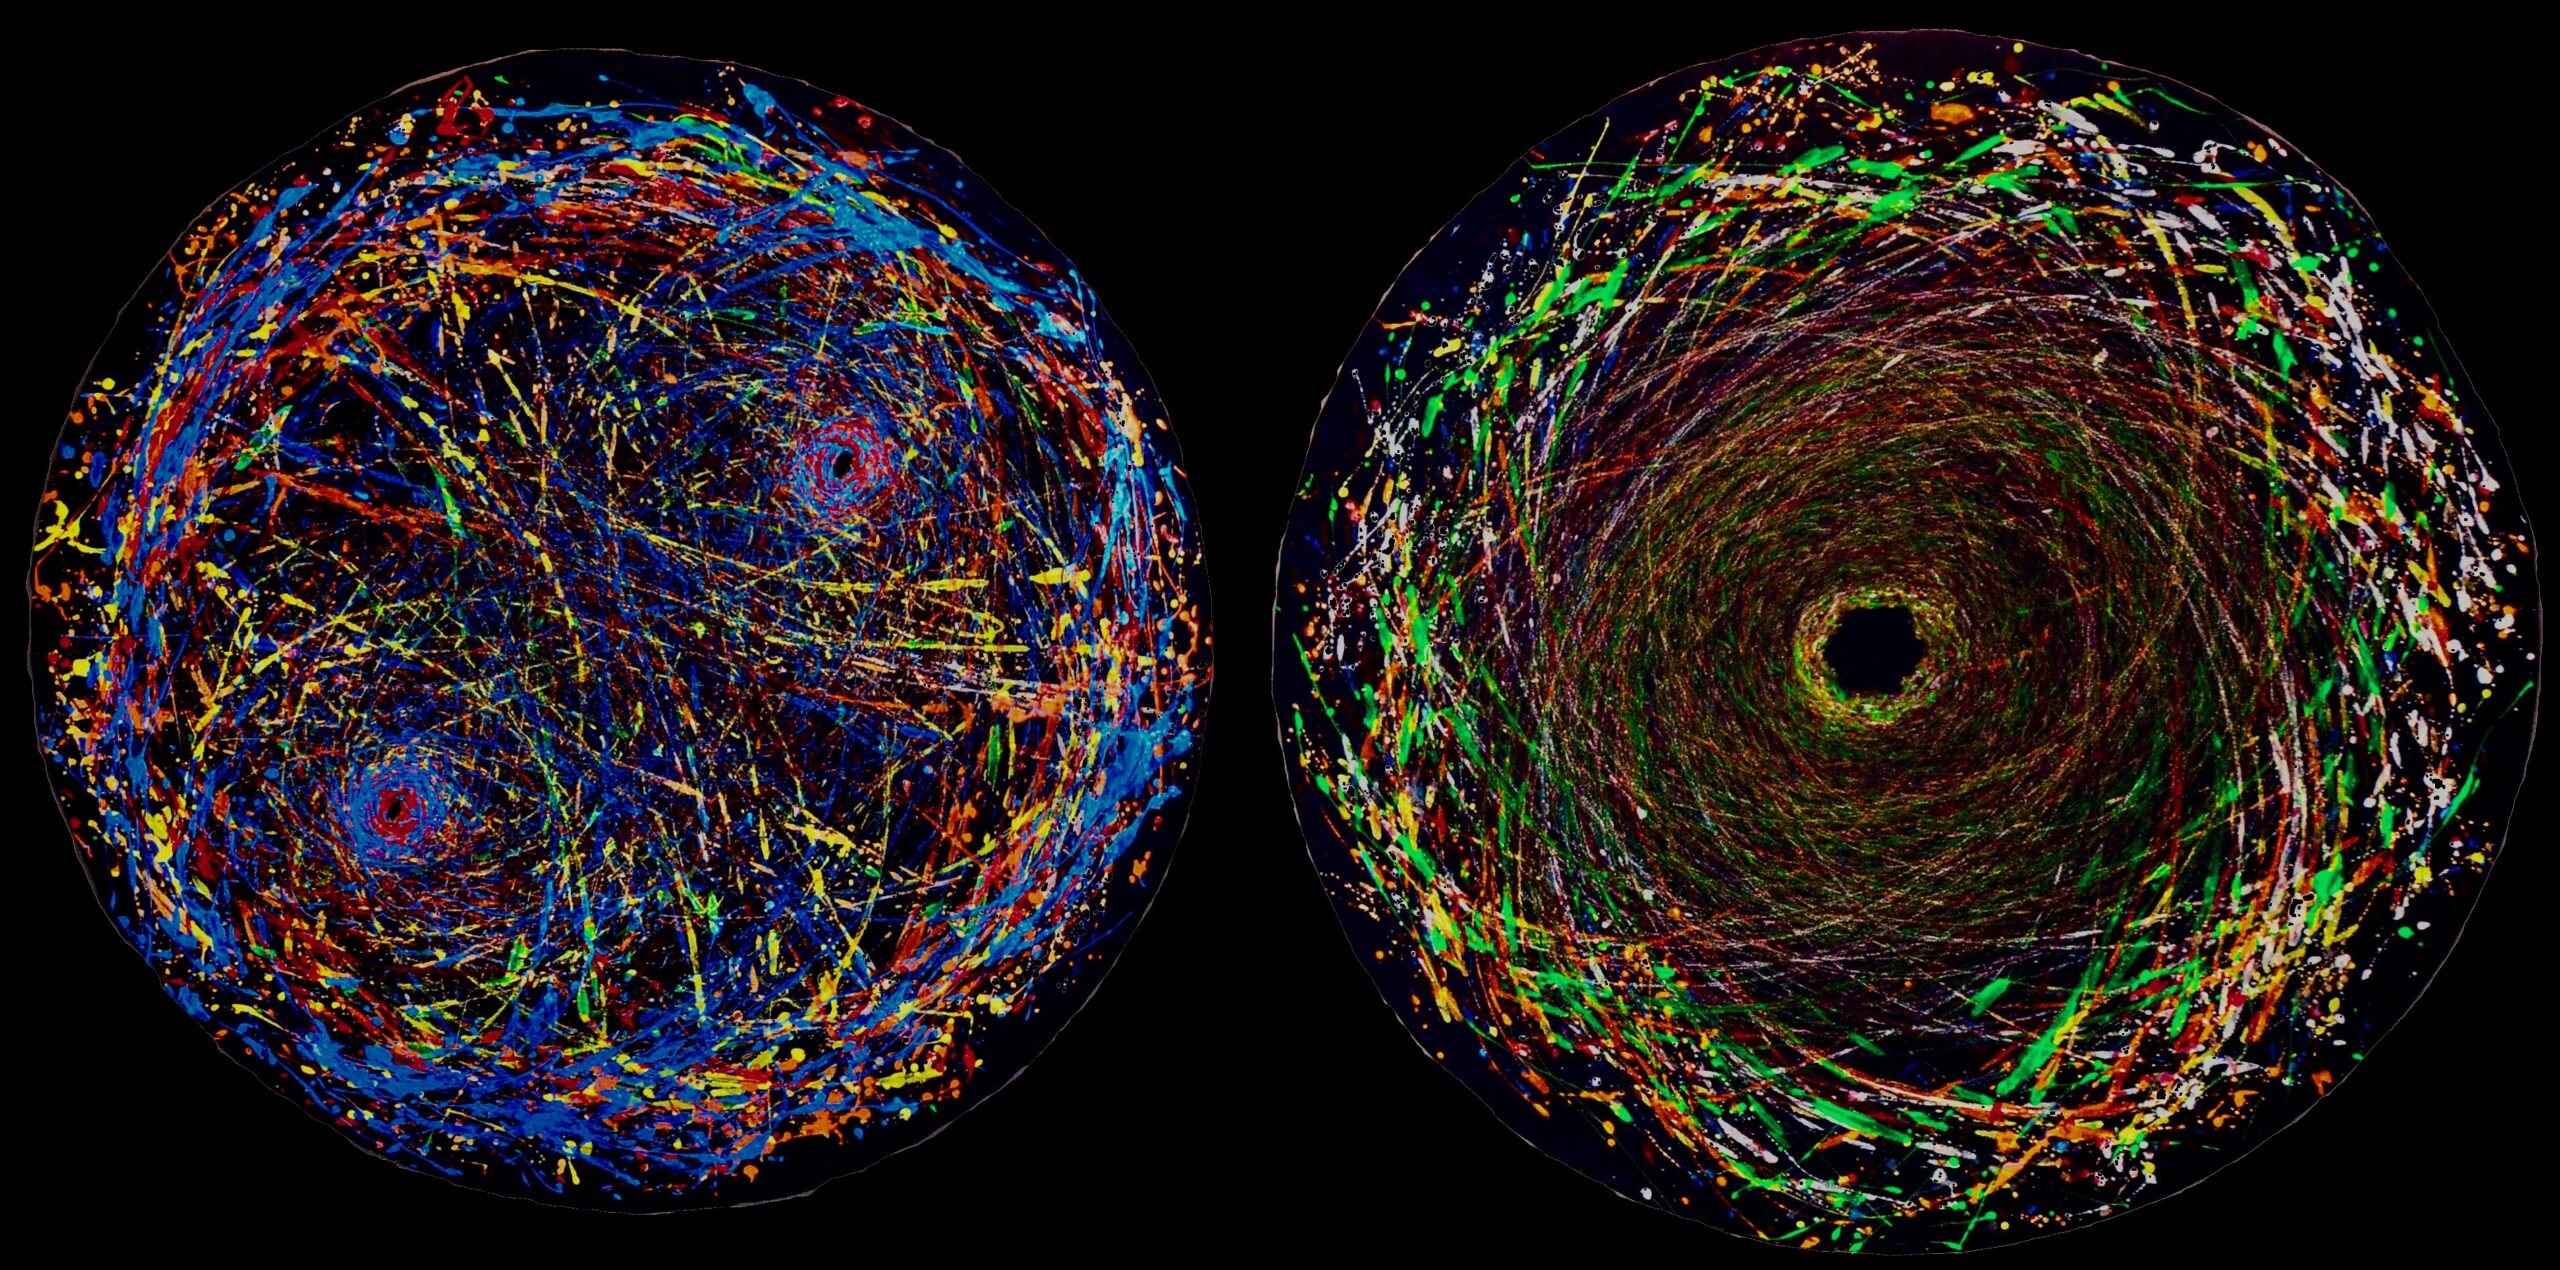 The 8 best science images, videos, and visualizations of the year